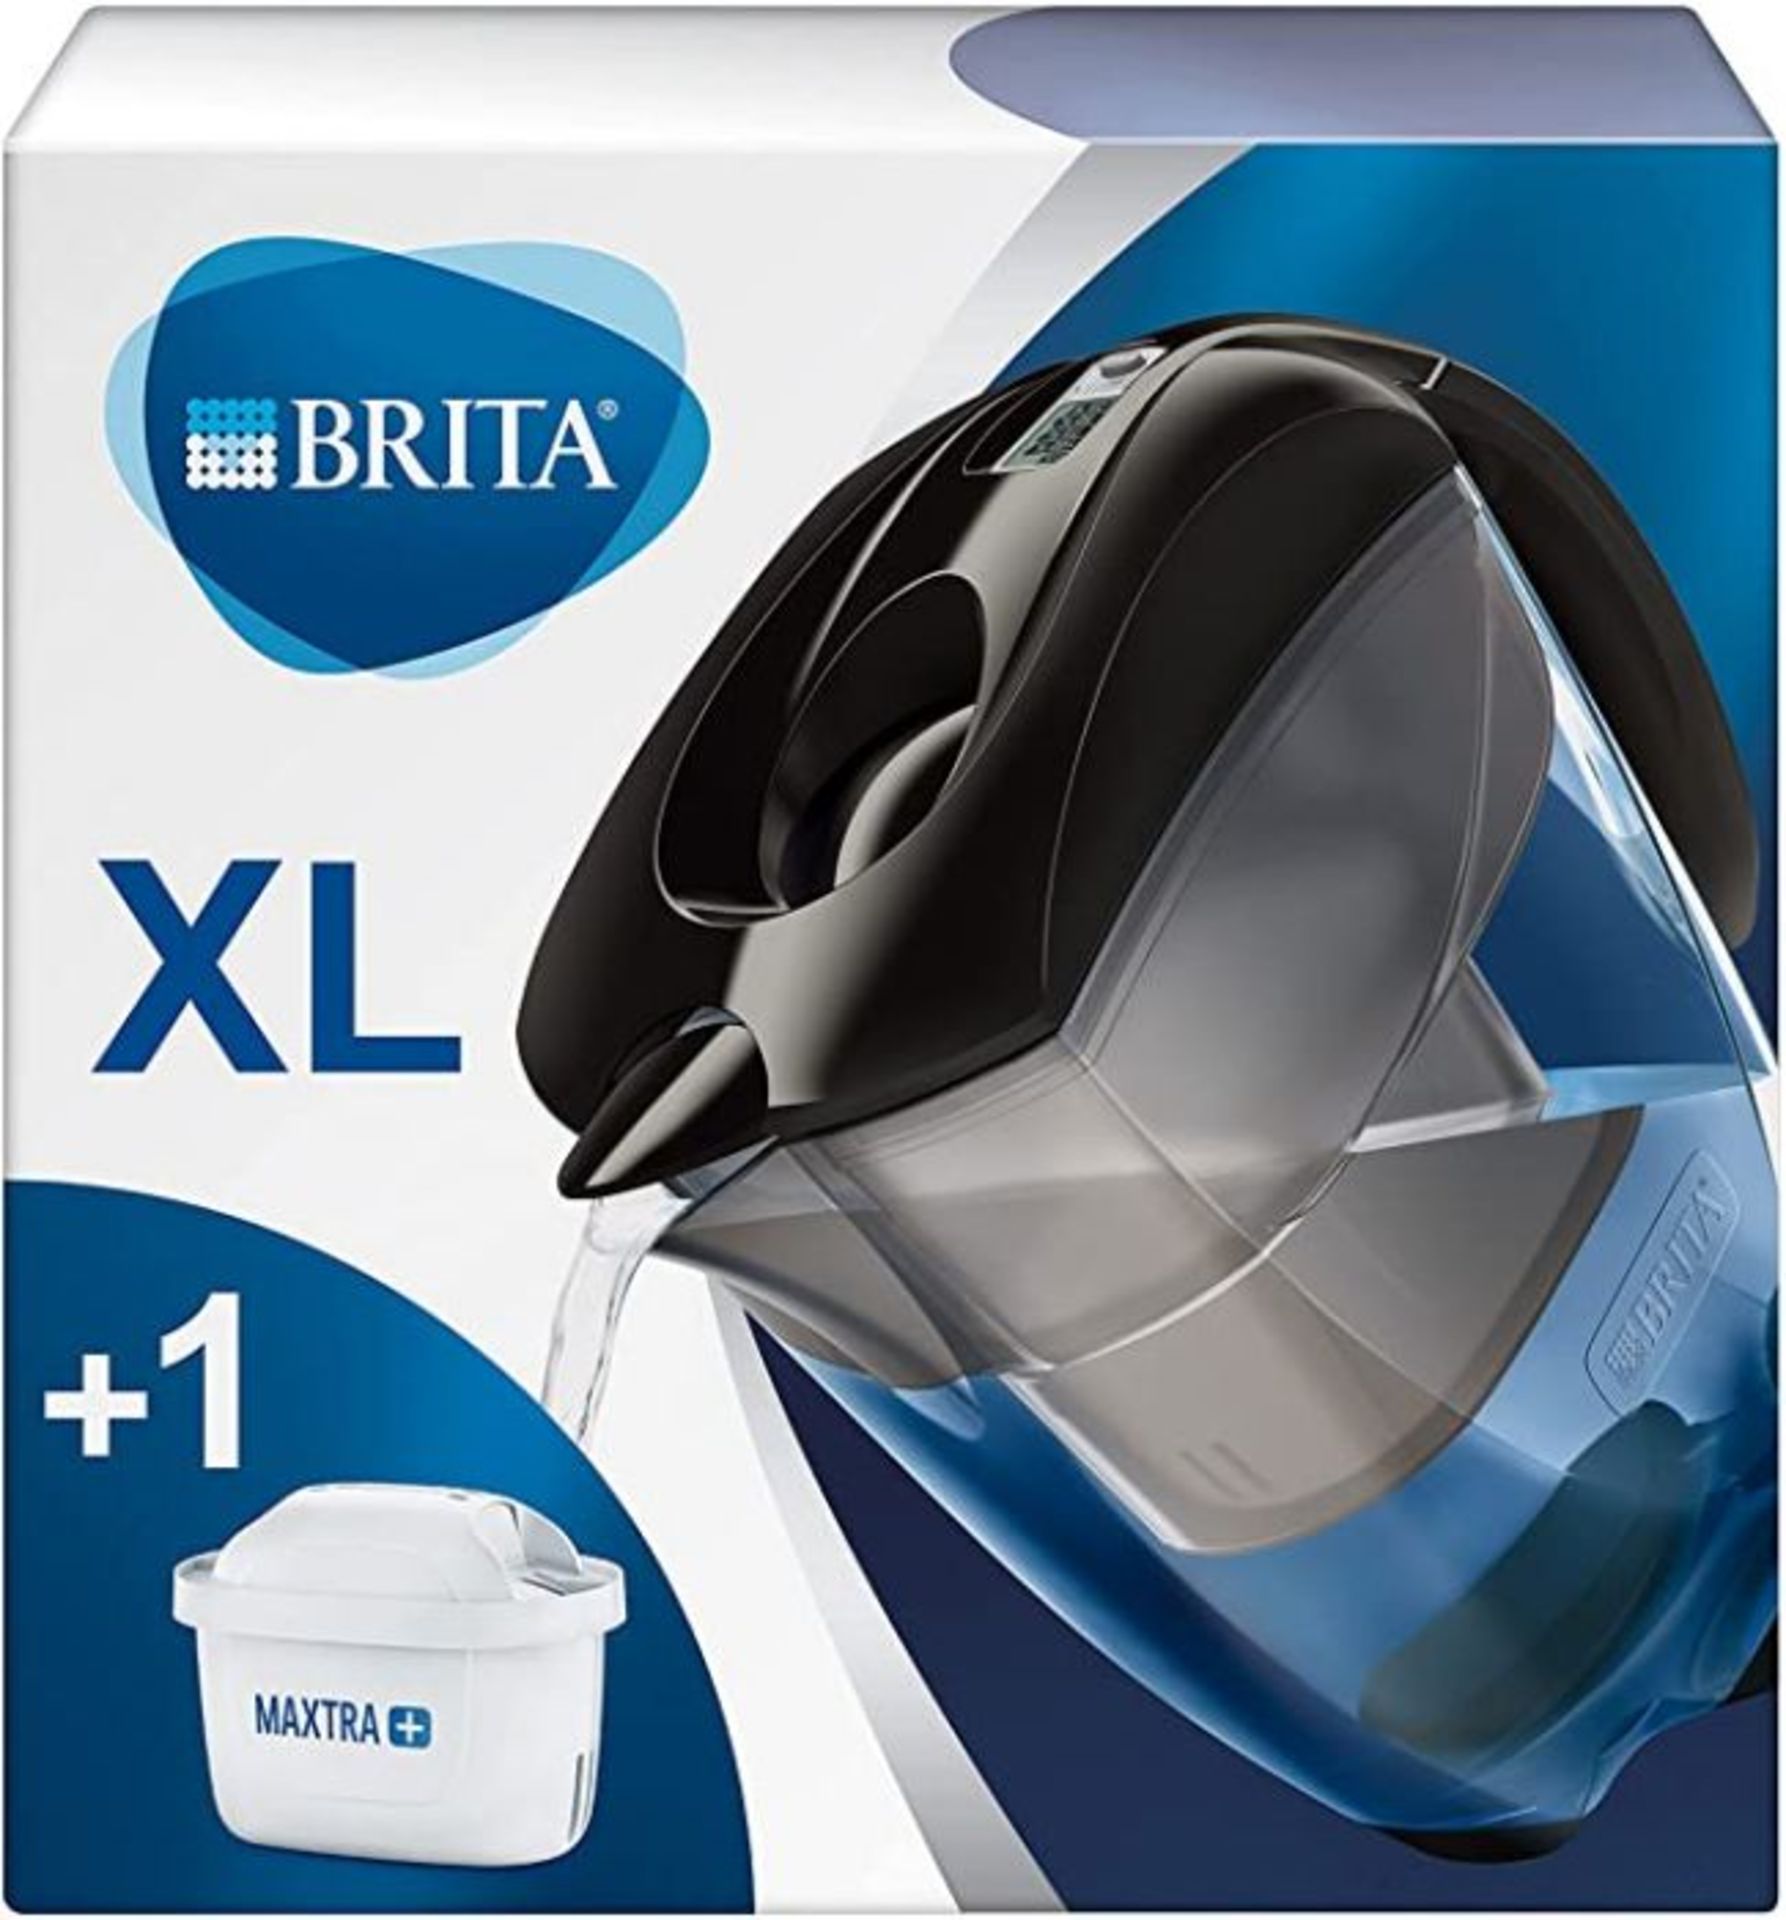 BRITA Elemaris XL water filter jug for reduction of chlorine, limescale and impurities, Includes 1 x